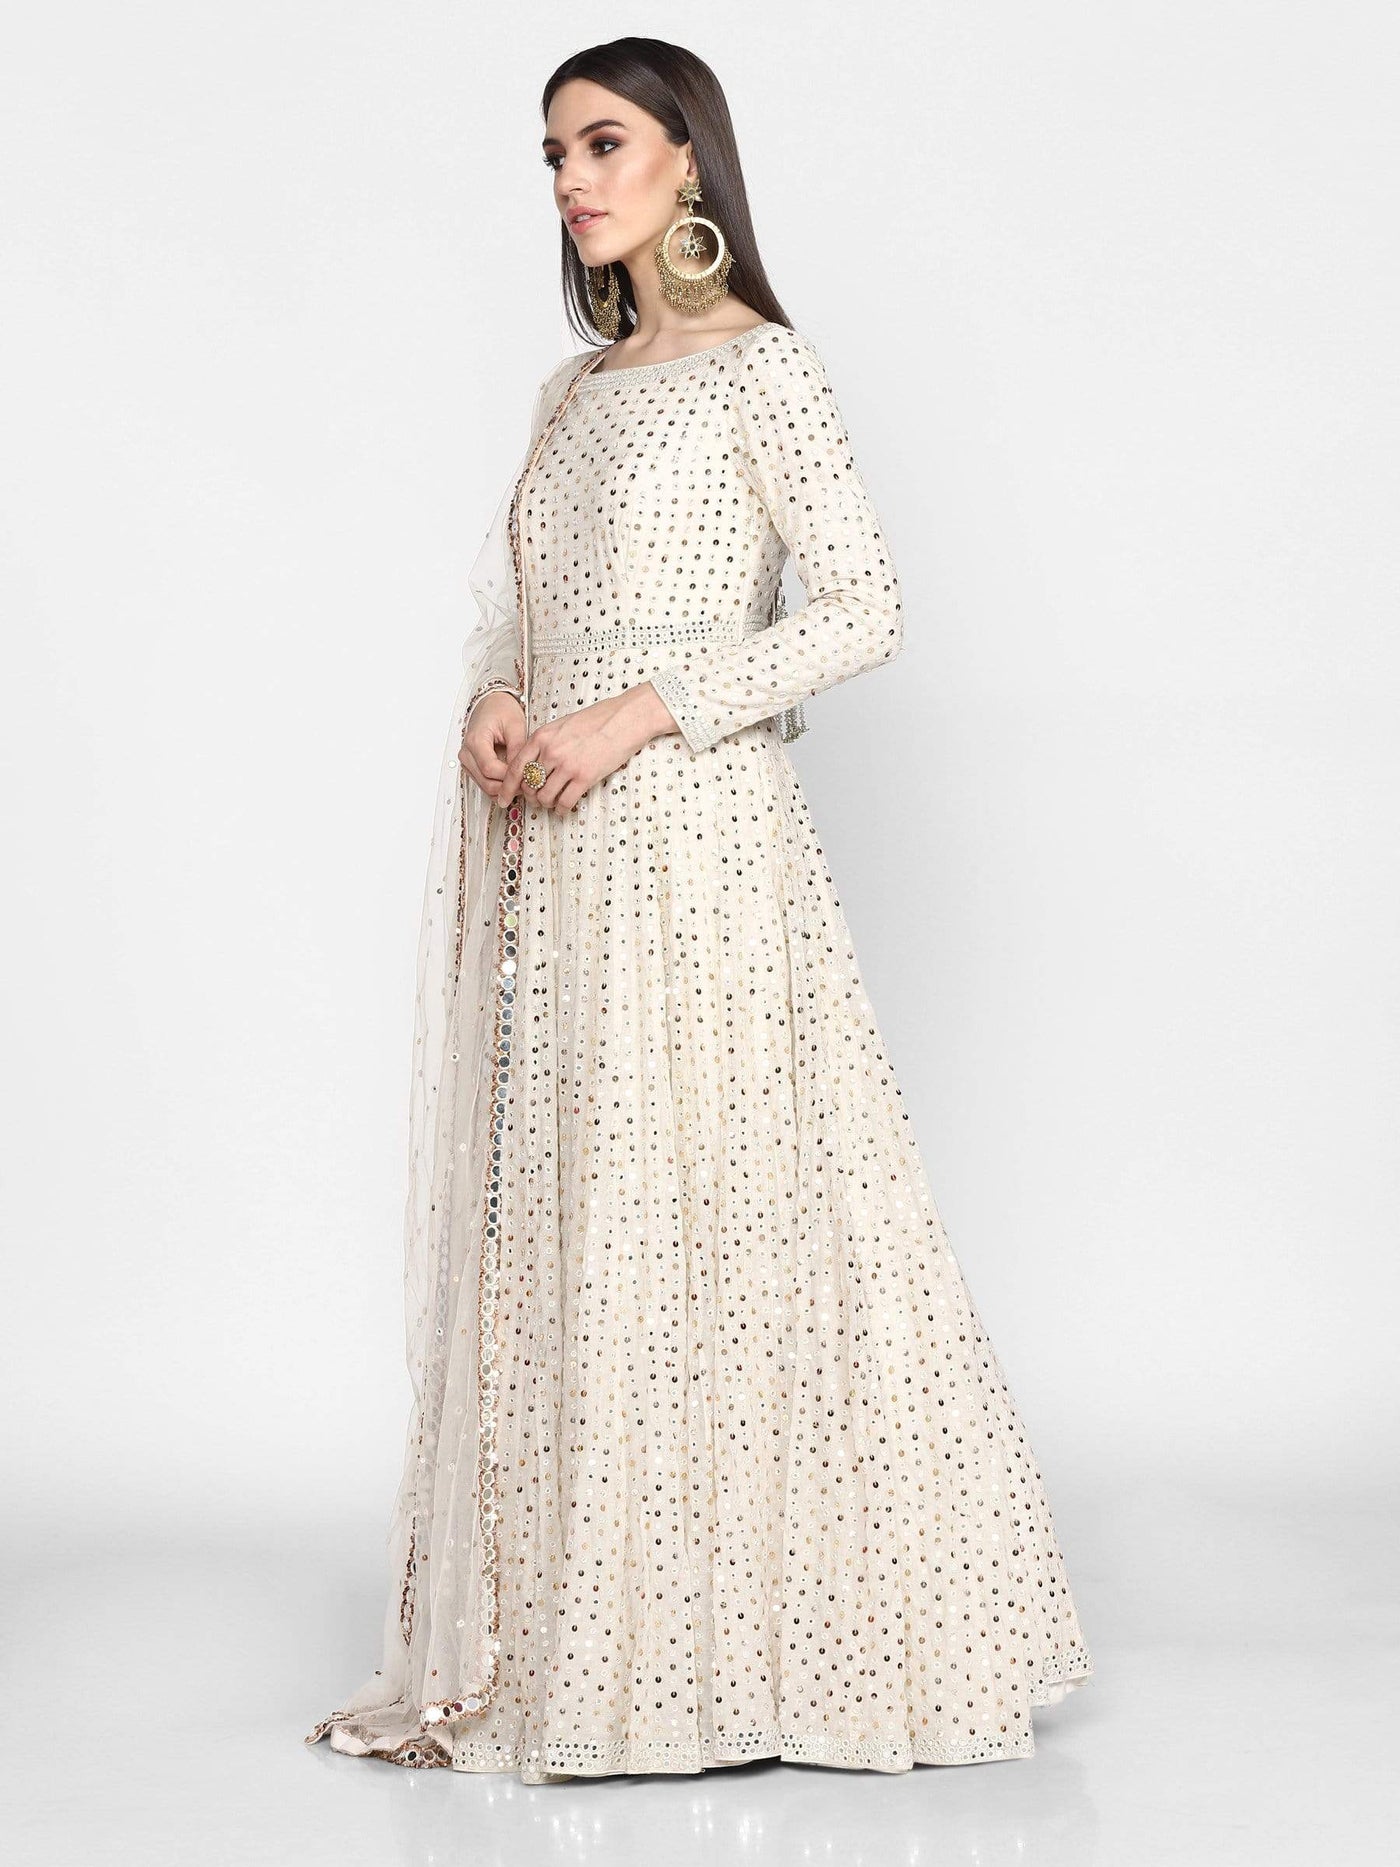 SHIVAACREATION Anarkali Gown Price in India - Buy SHIVAACREATION Anarkali  Gown online at Flipkart.com